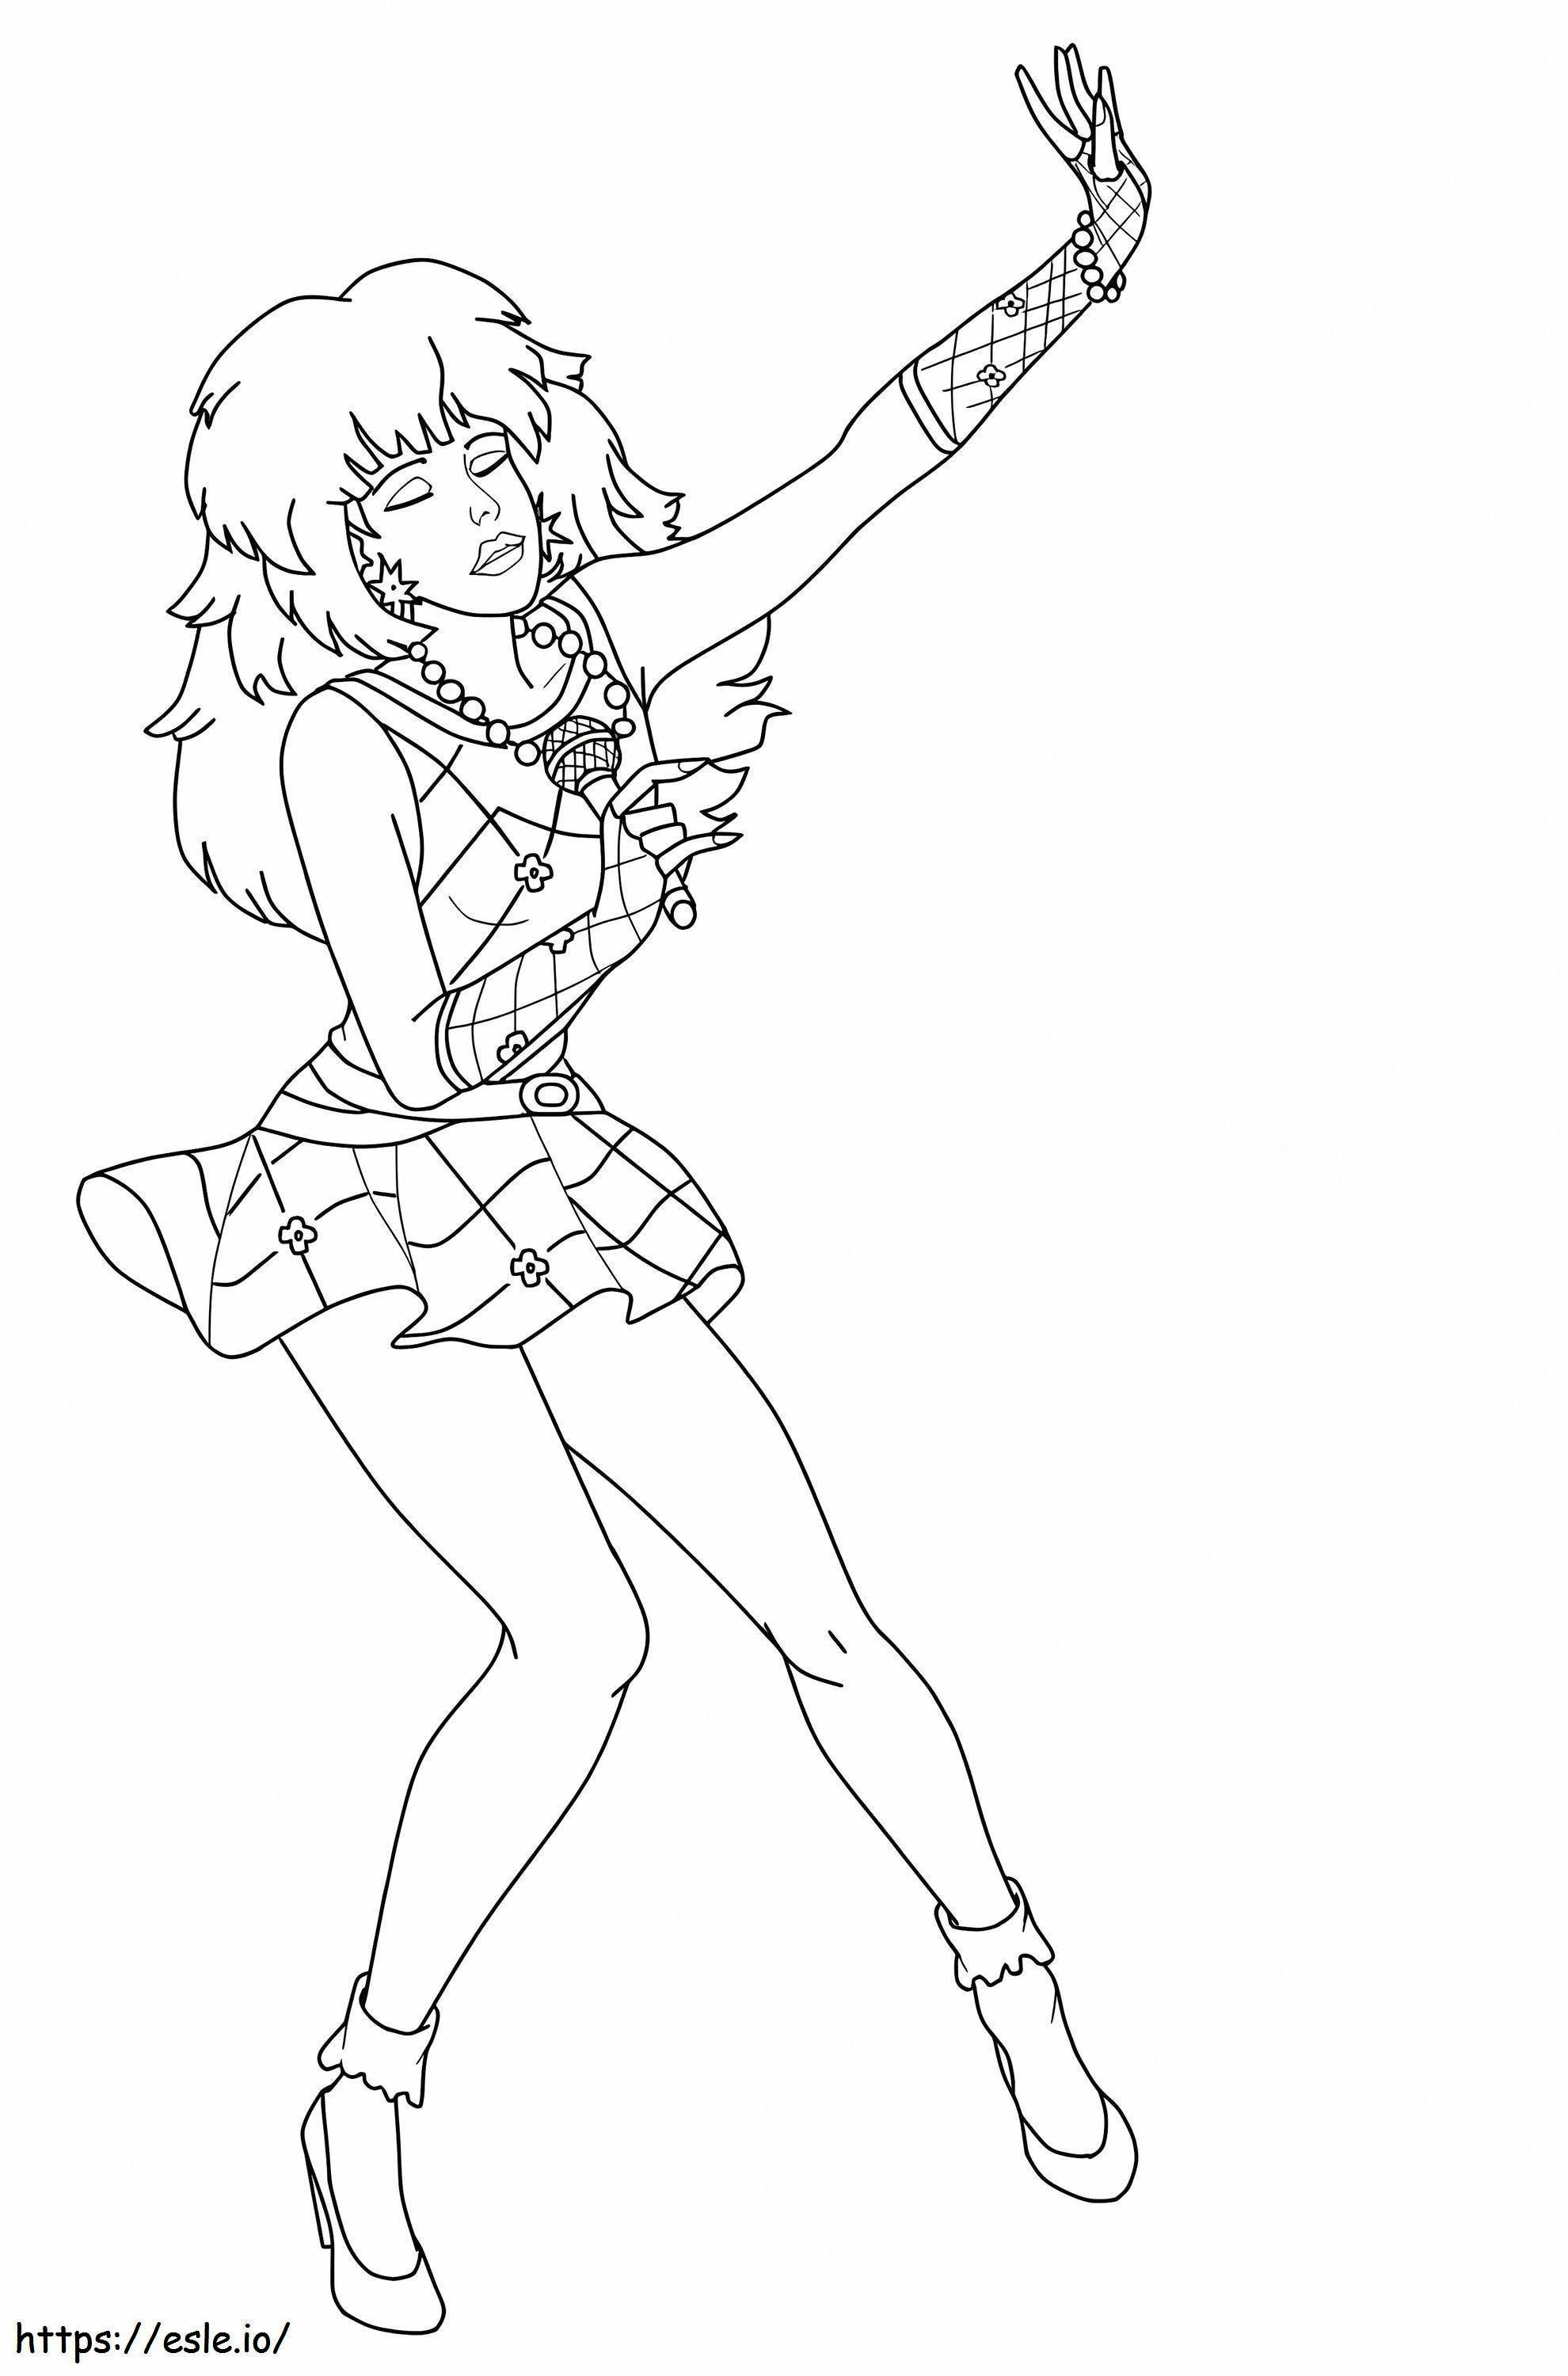 Jem And The Holograms 5 coloring page